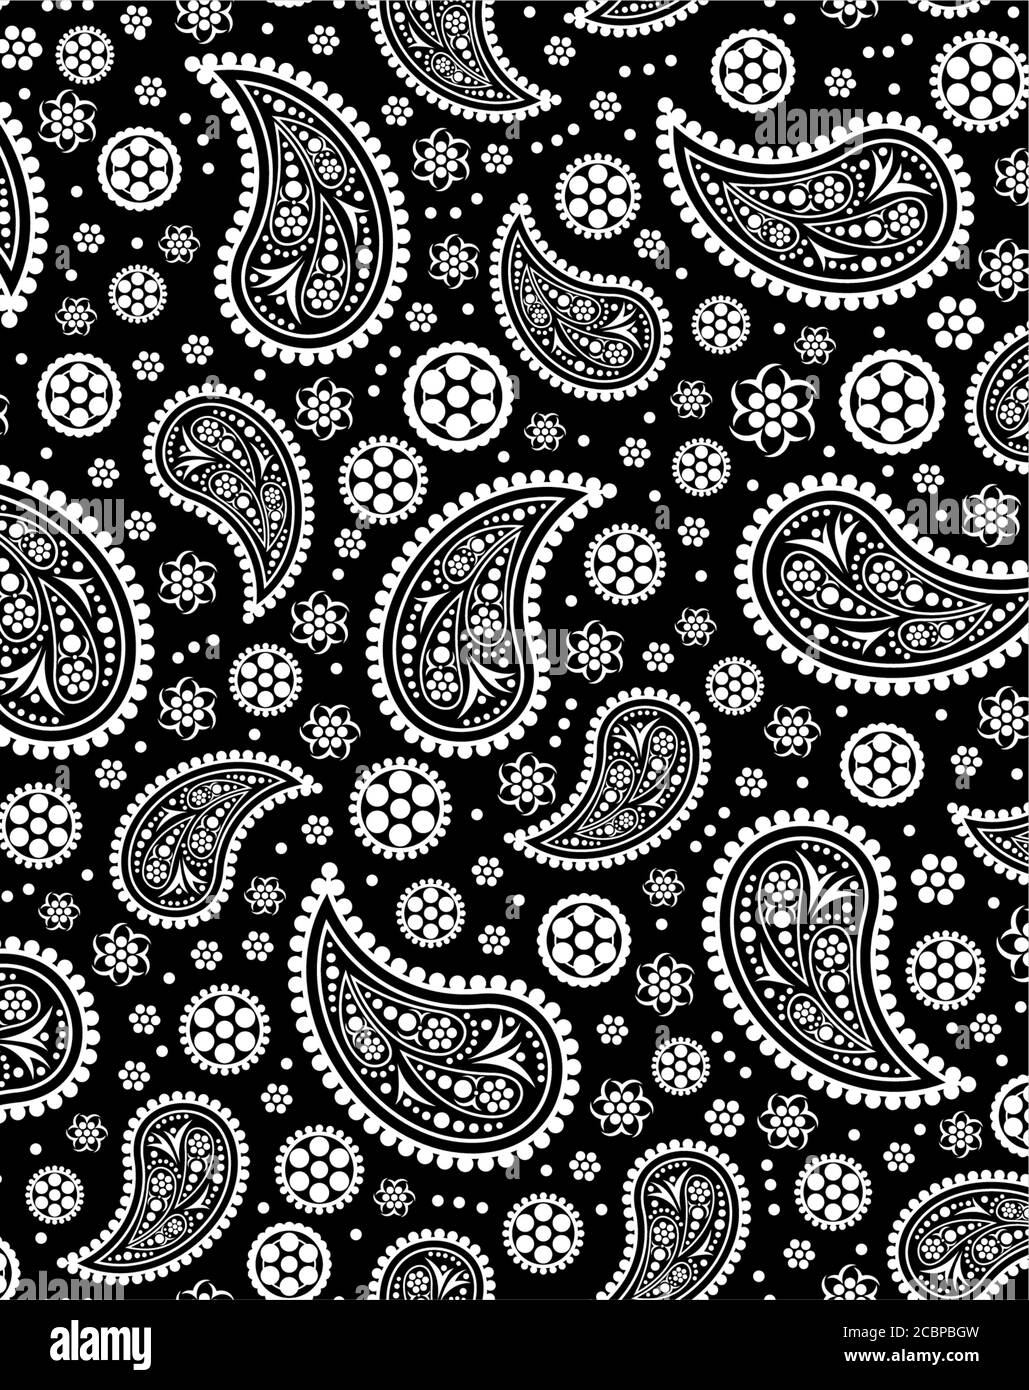 Paisley pattern vector background, seamless floral ornament in